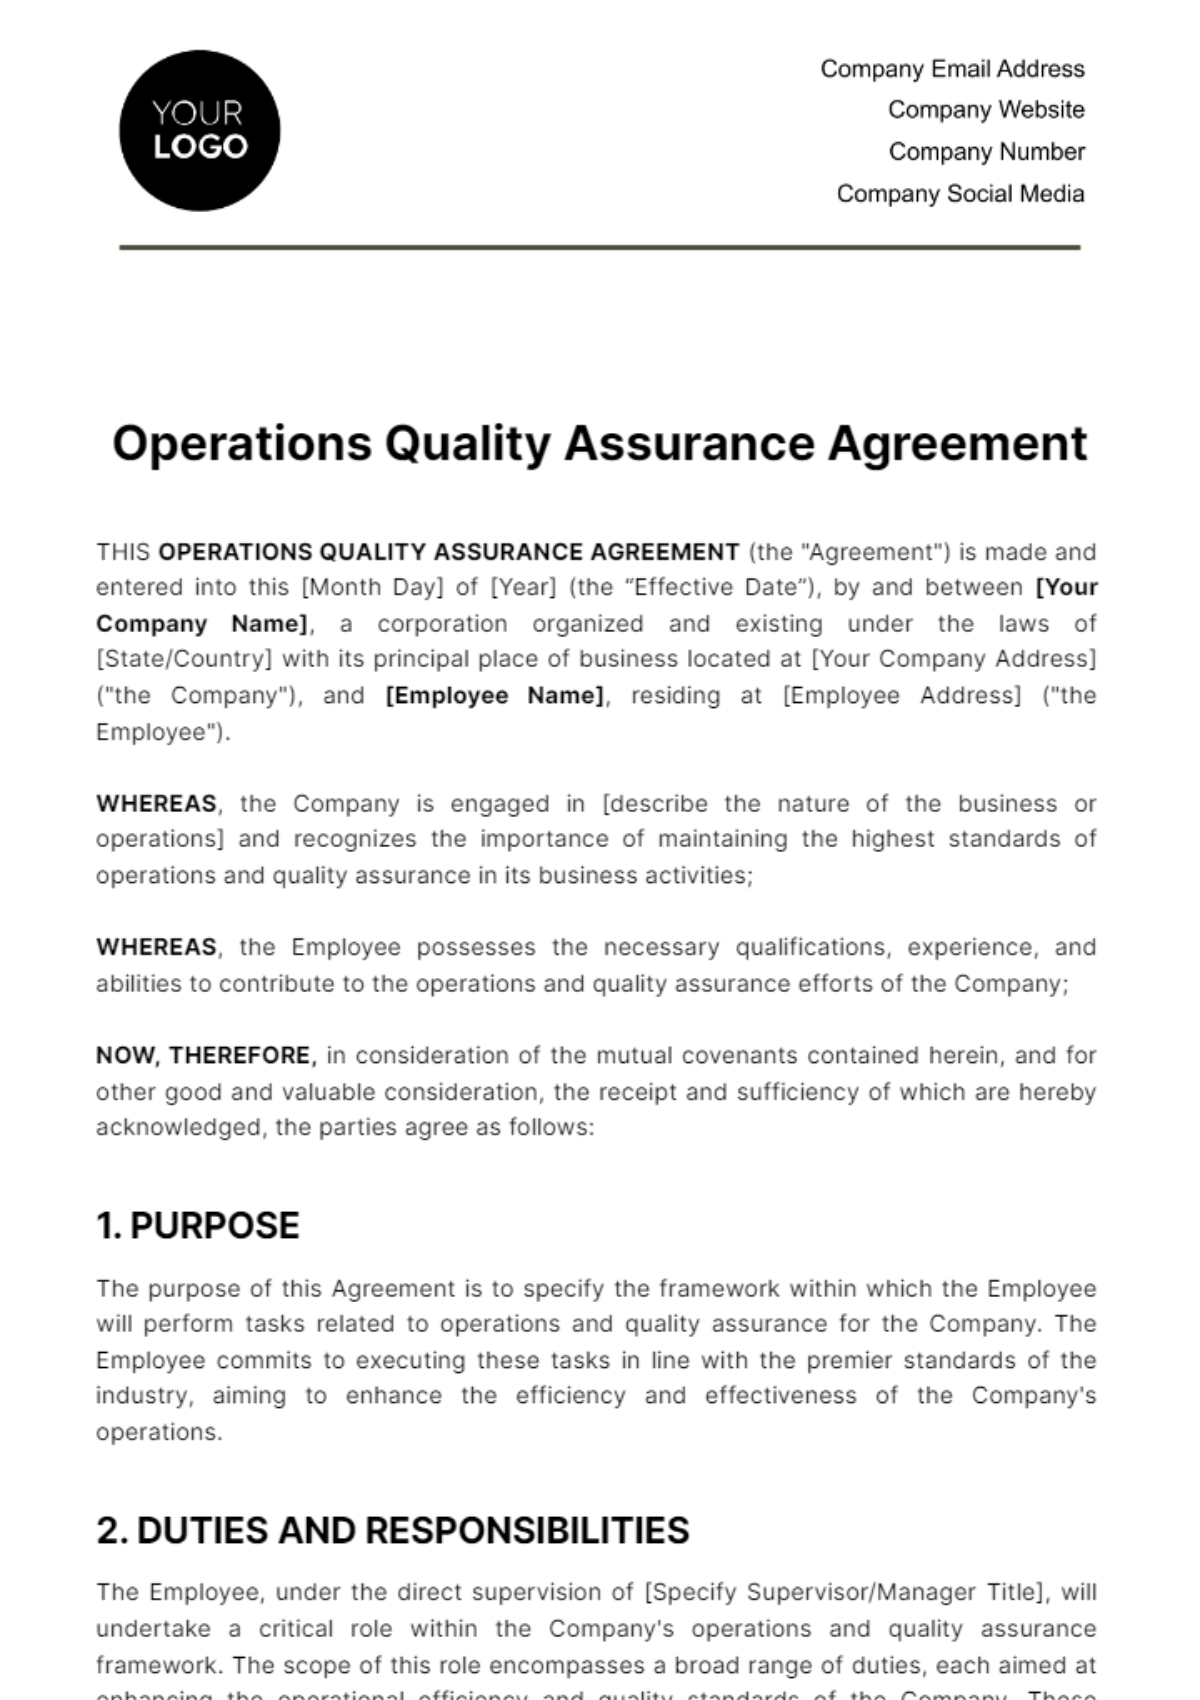 Operations Quality Assurance Agreement Template